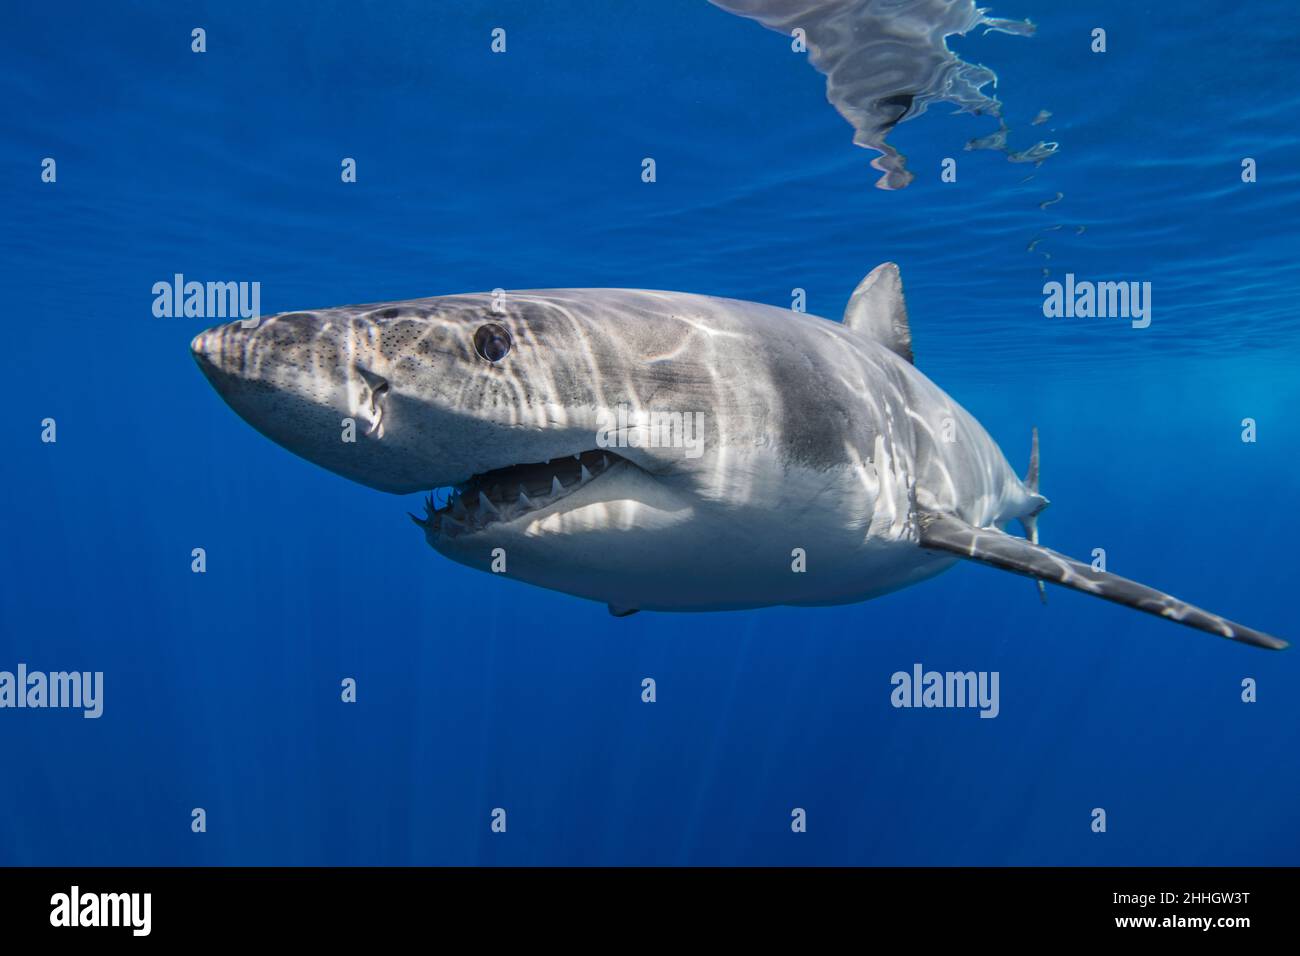 Mexico, Guadalupe, Great white shark underwater Stock Photo